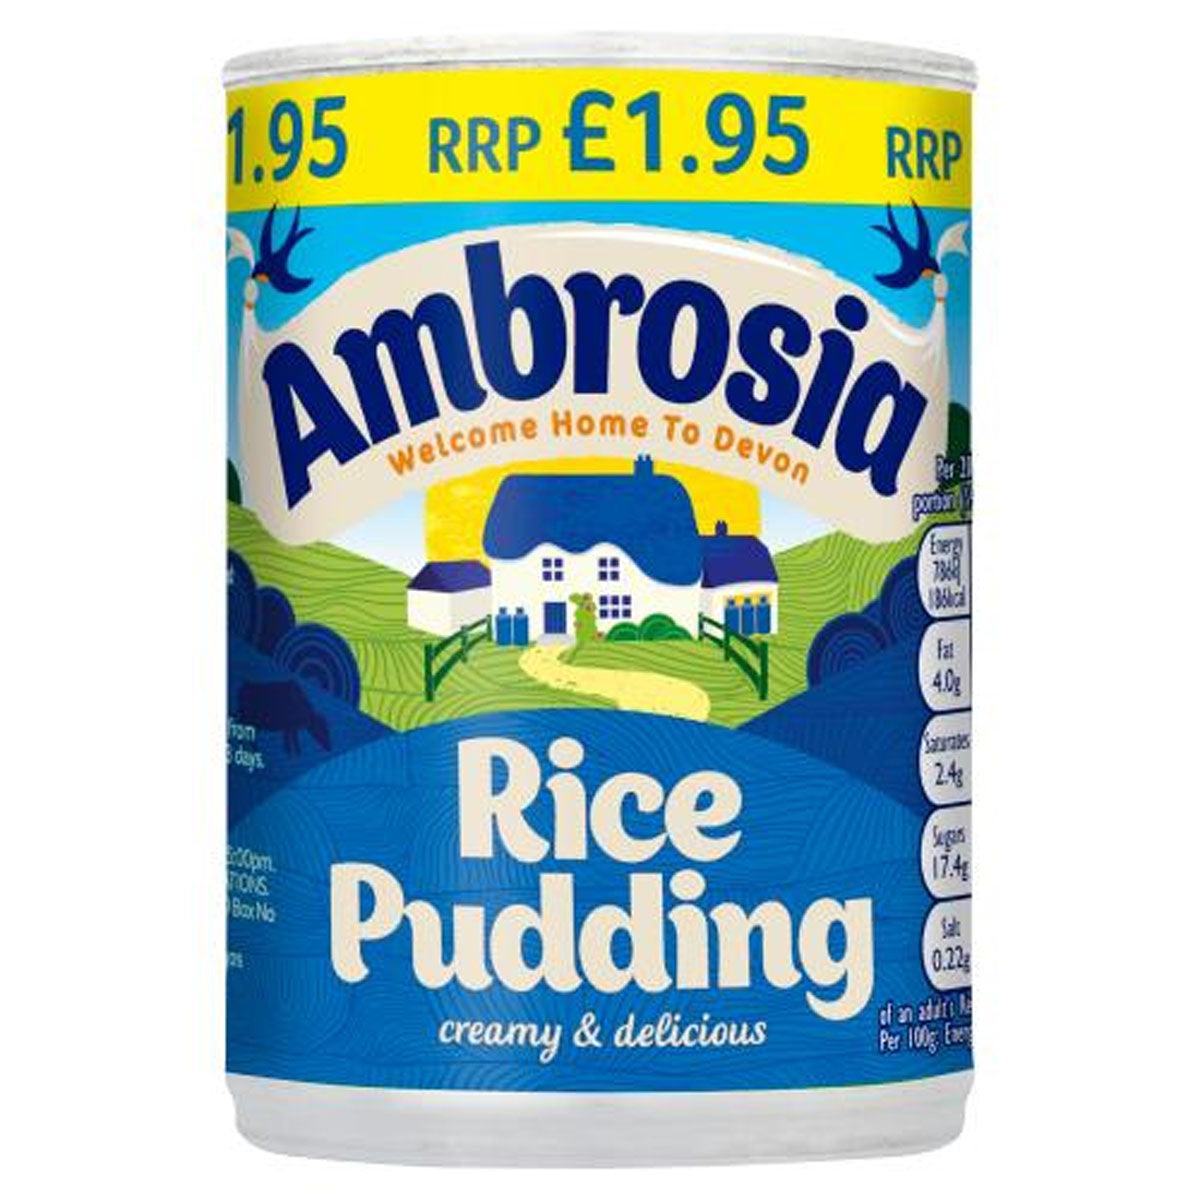 A 400g can of Ambrosia - Rice Pudding - 400g.